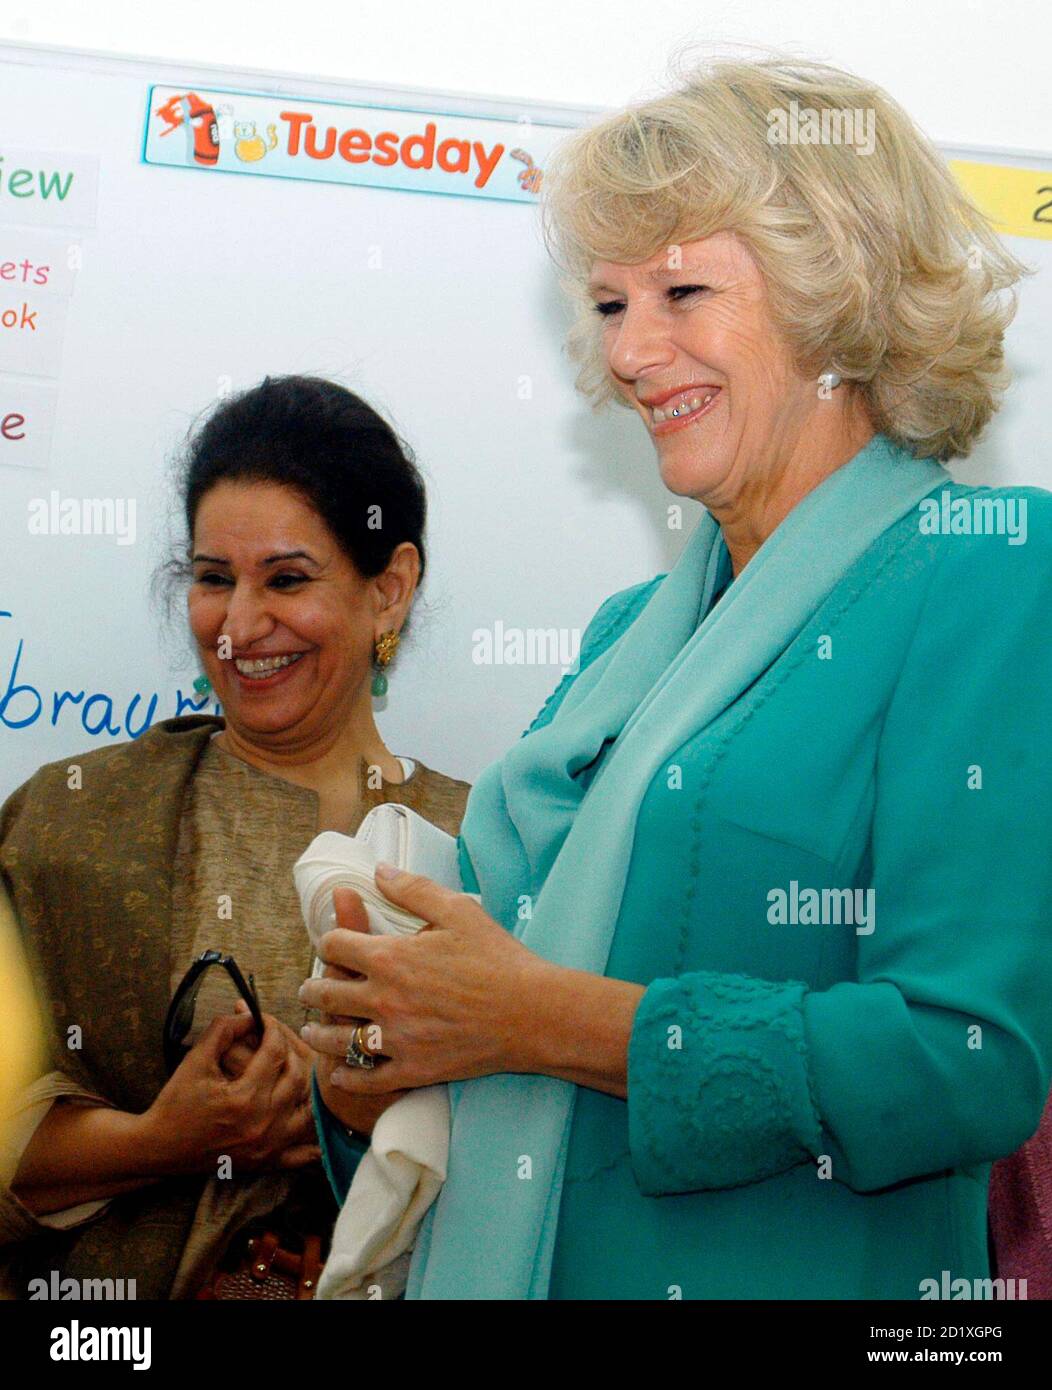 duchess-of-cornwall-camilla-r-smiles-as-she-tours-the-center-for-child-evaluation-and-teaching-in-kuwait-city-february-20-2007-prince-charles-and-the-duchess-are-on-a-four-day-official-visit-reutersyasser-al-zayyatpool-kuwait-2D1XGPG.jpg